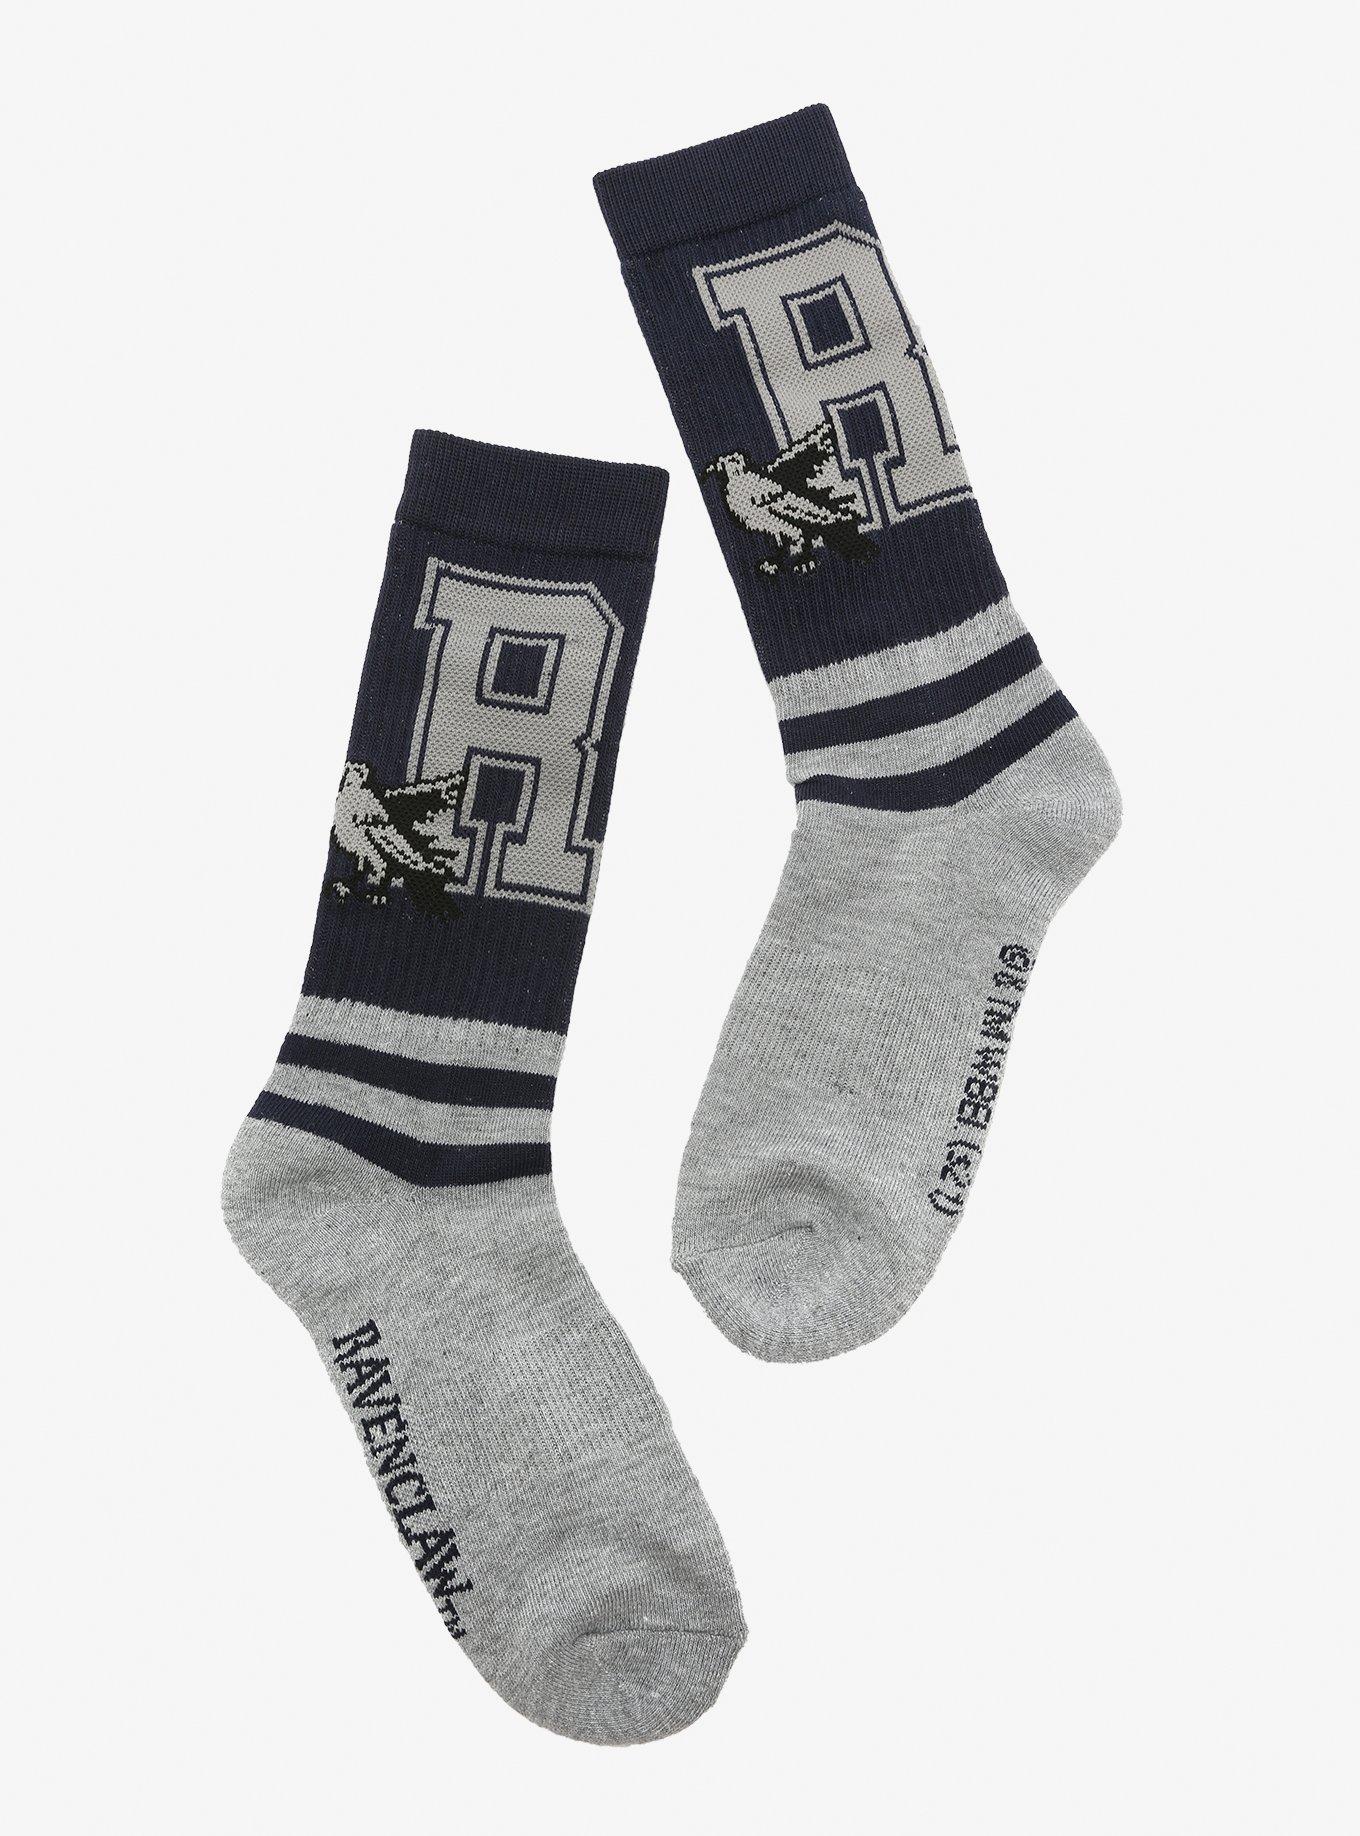 Harry Potter Ravcenclaw Collegiate Crew Socks - BoxLunch Exclusive, , hi-res